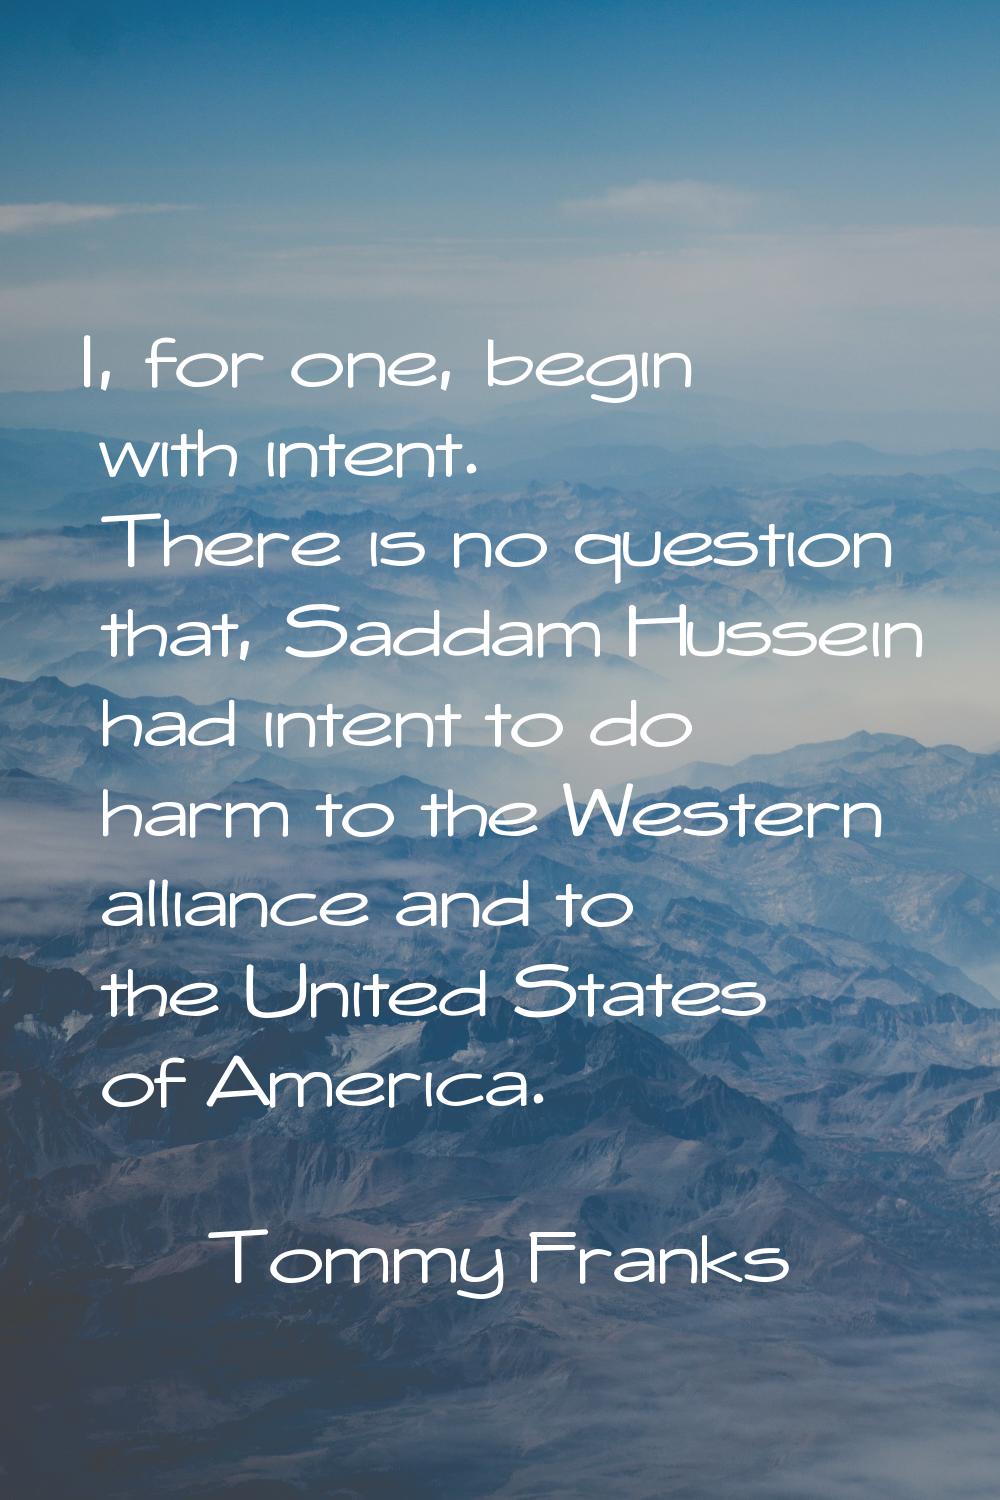 I, for one, begin with intent. There is no question that, Saddam Hussein had intent to do harm to t